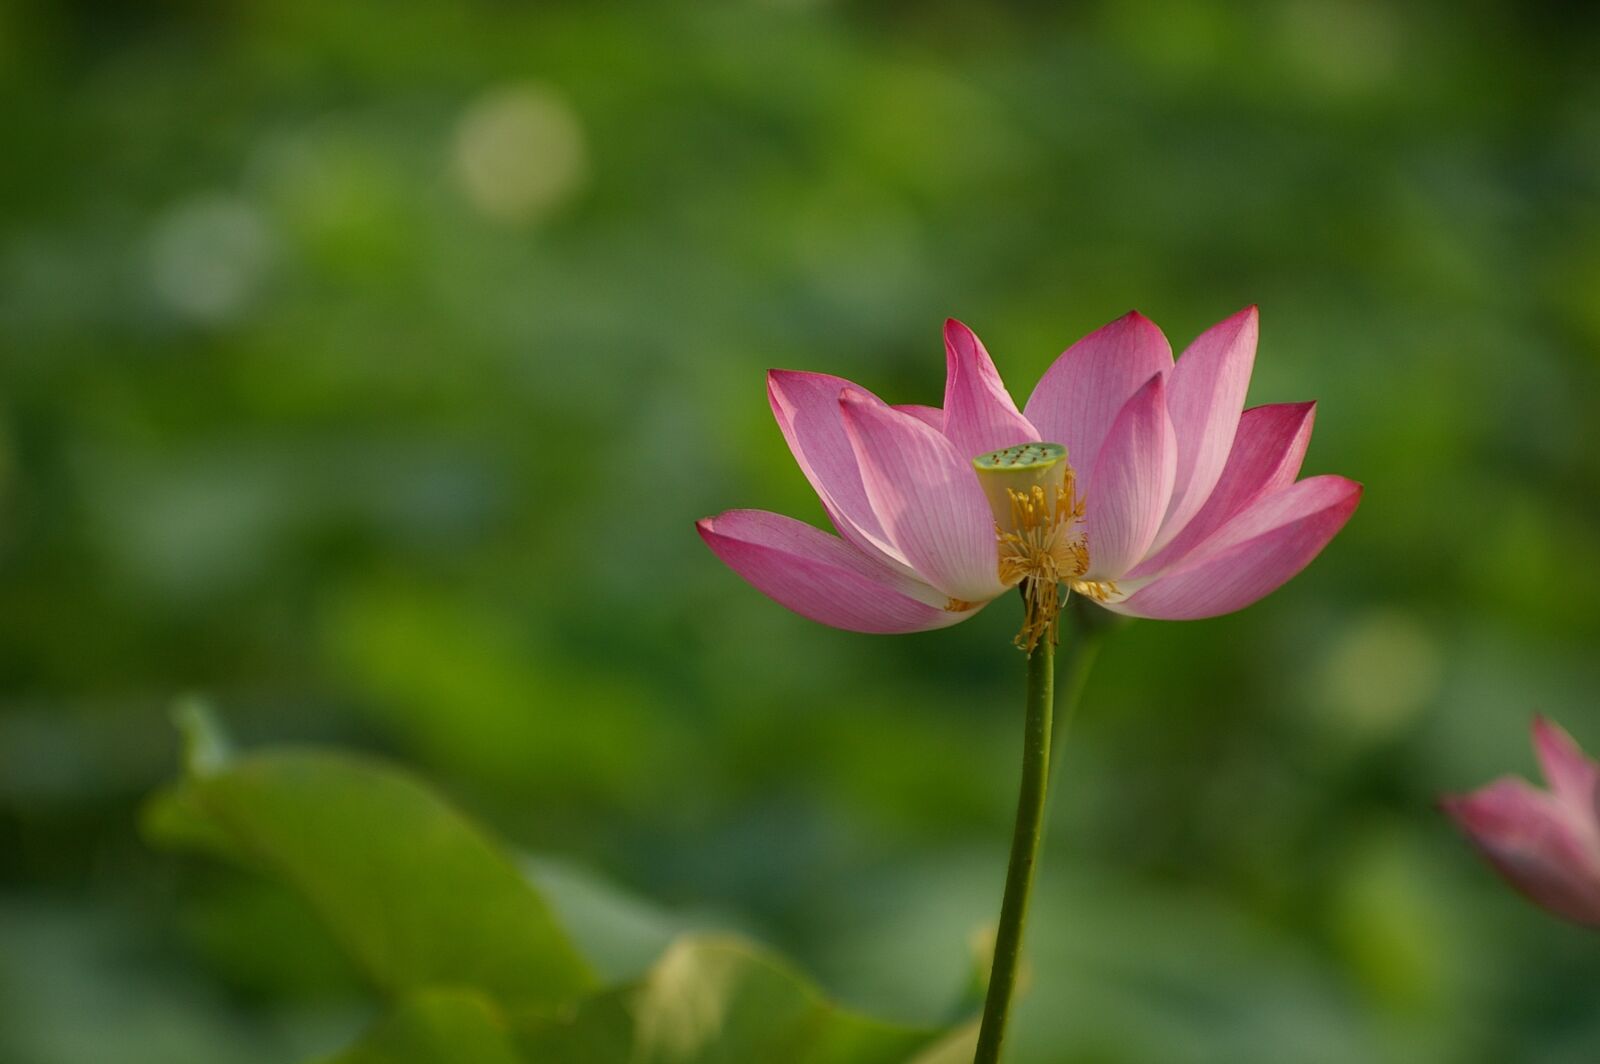 Pentax *ist DS2 sample photo. Flowers, lotus, nature photography